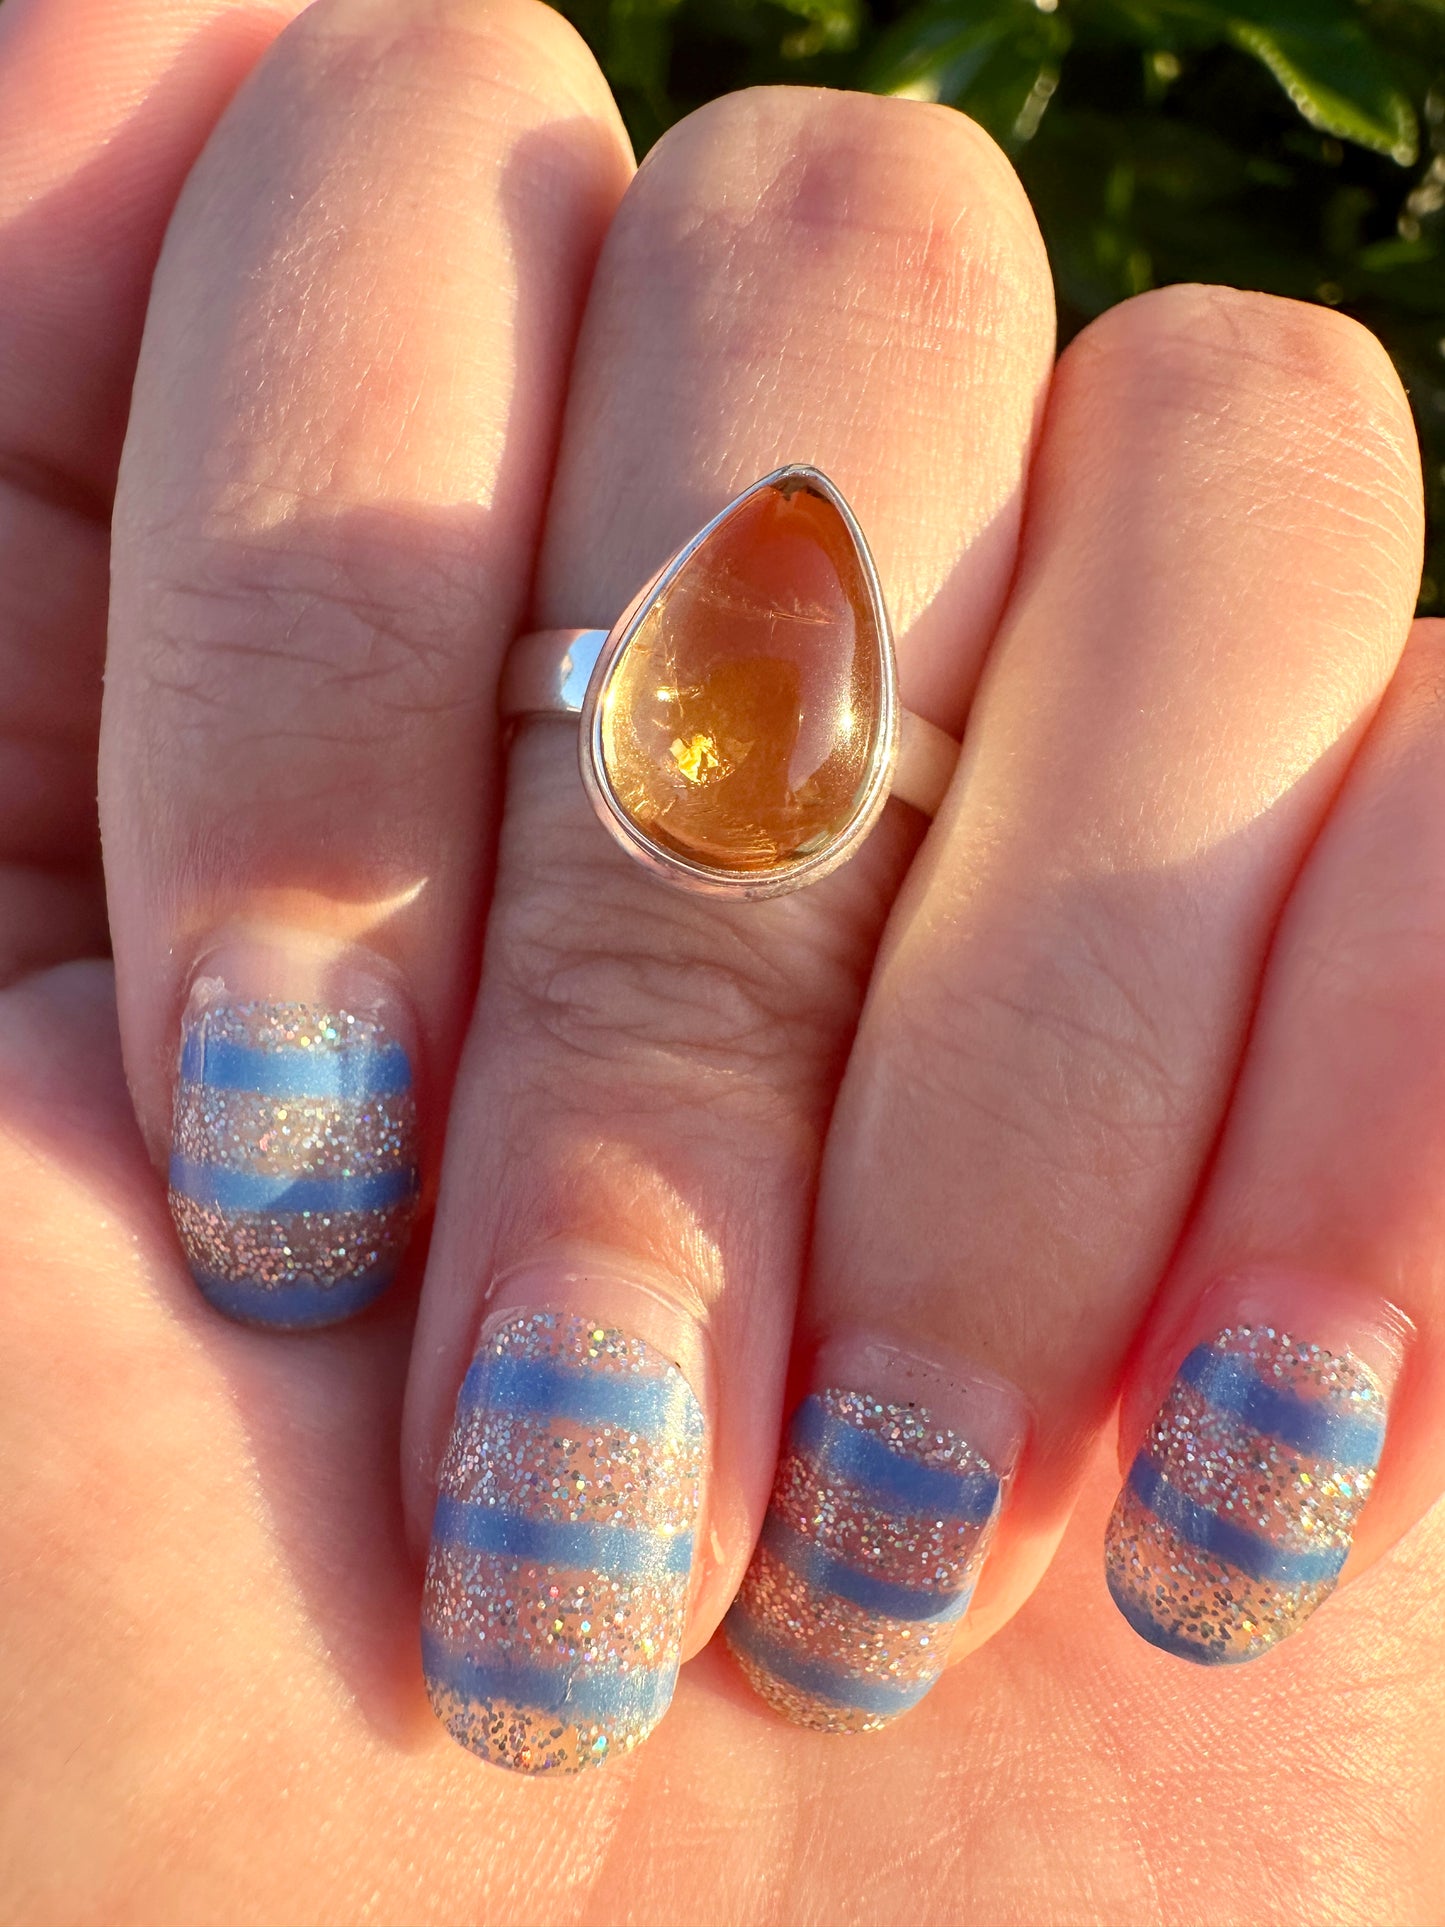 Citrine Sterling Silver Ring Size 7.25 - Elegant Jewelry for Prosperity and Joy, Perfect for Enhancing Positive Energy and Personal Style